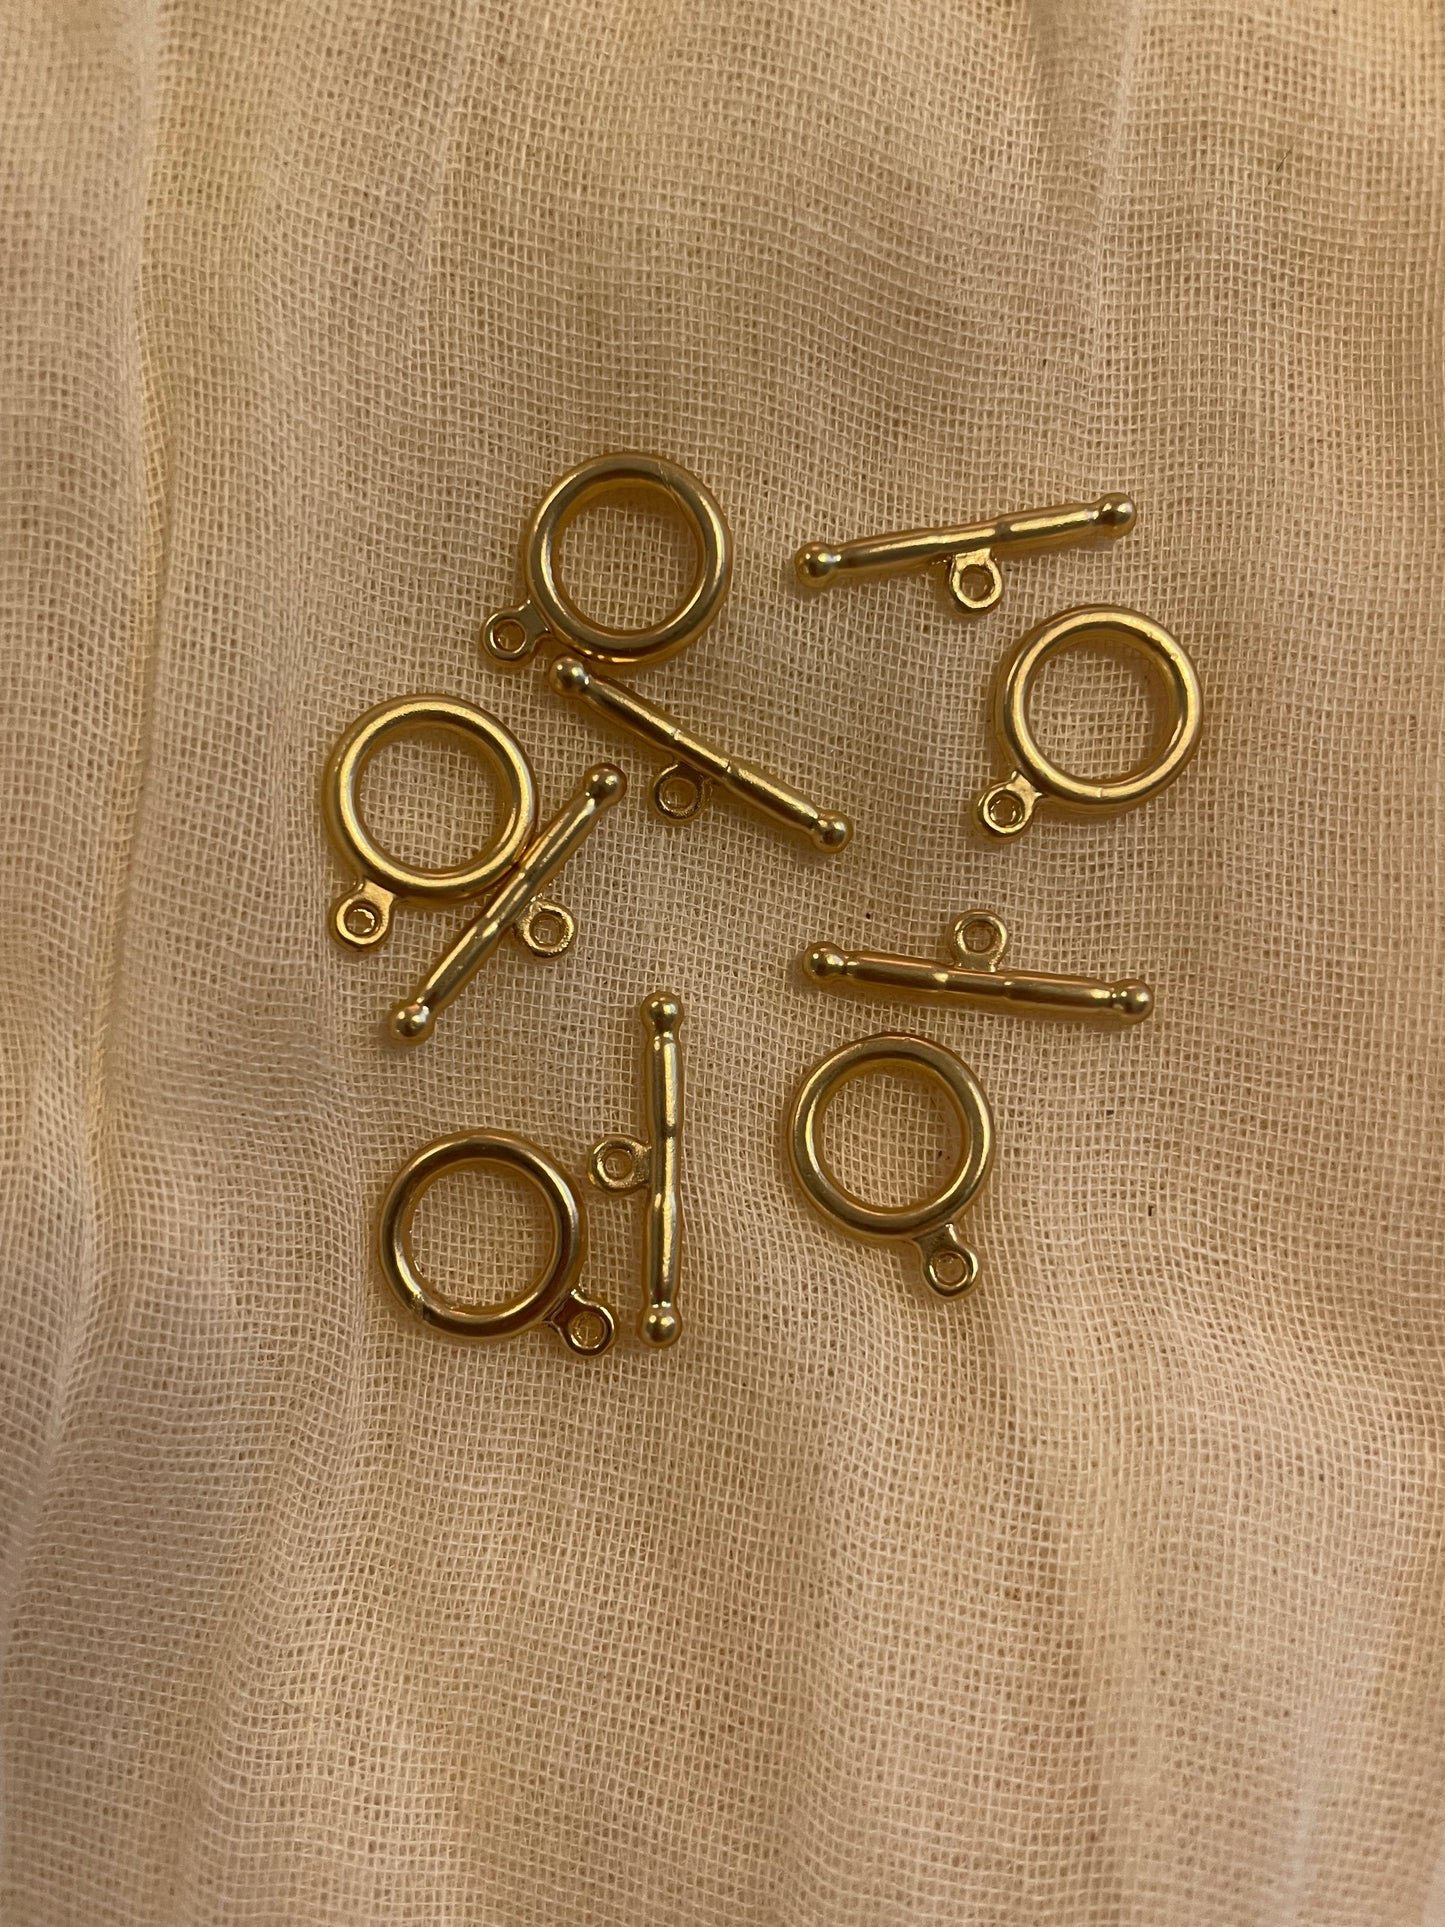 Matte Gold Plated Toggle Clasps 19mm x 24mm (5 Sets)